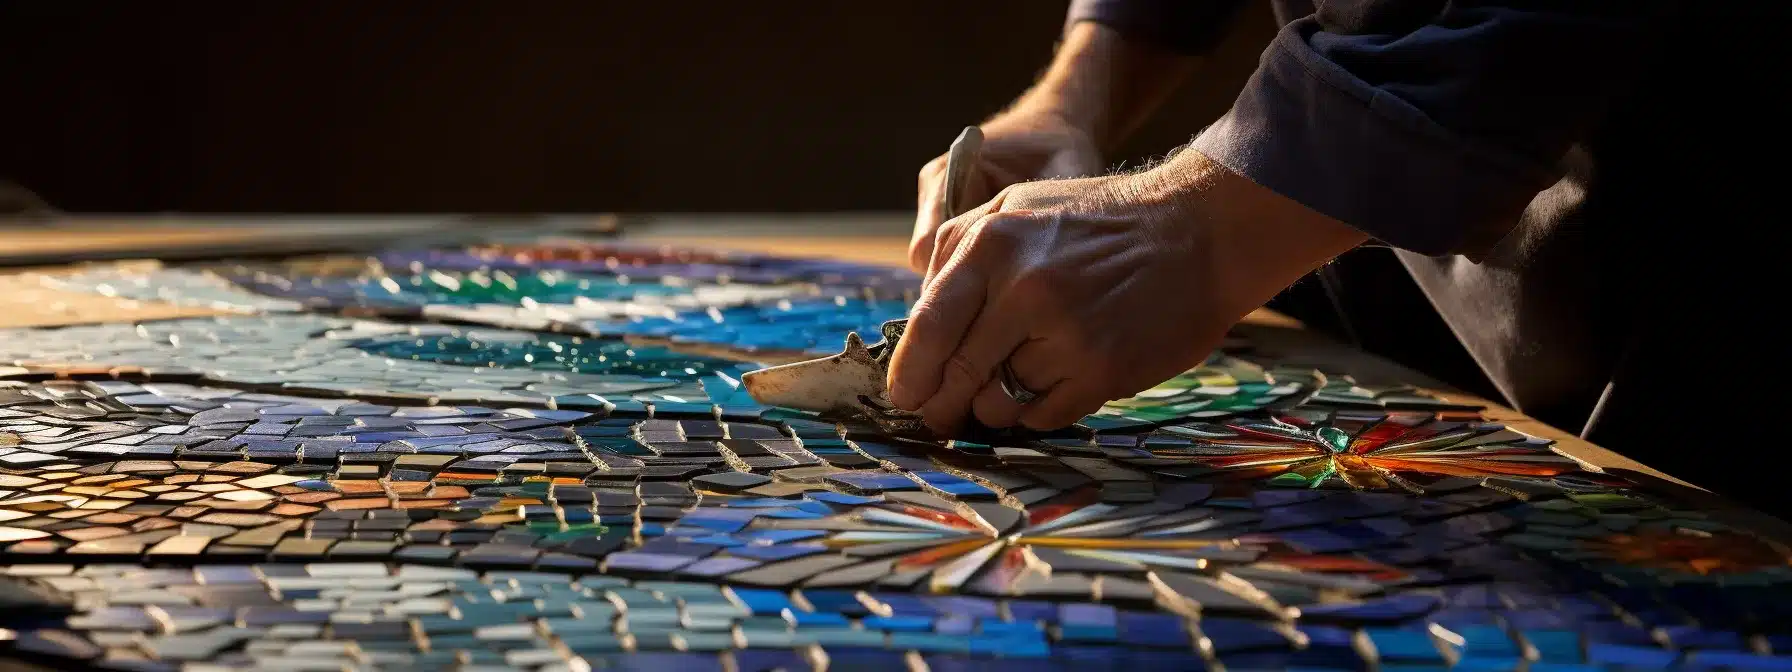 A Mosaic Artist Shaping Each Piece On Feeling And Gut Instinct.